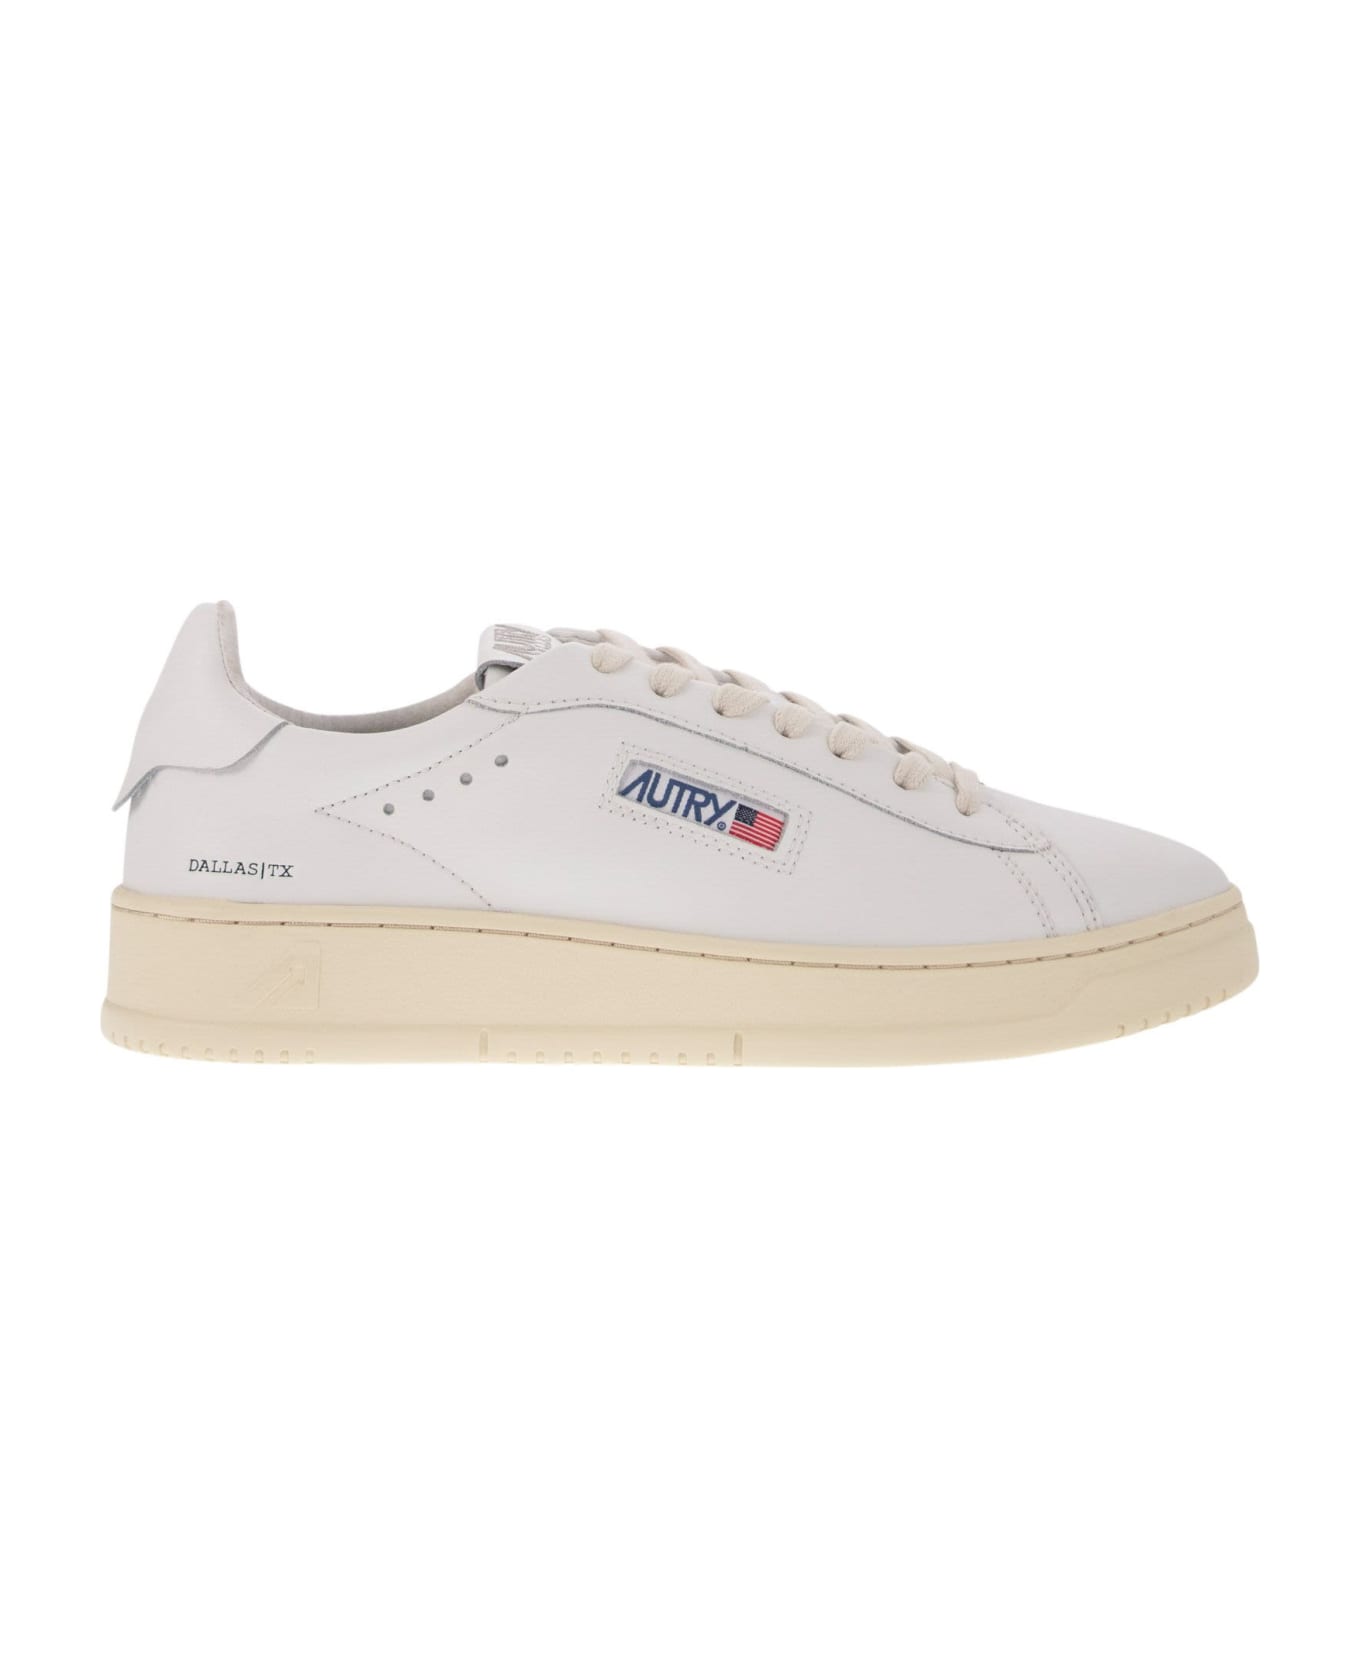 Autry Dallas Low Sneakers In White Leather - White スニーカー